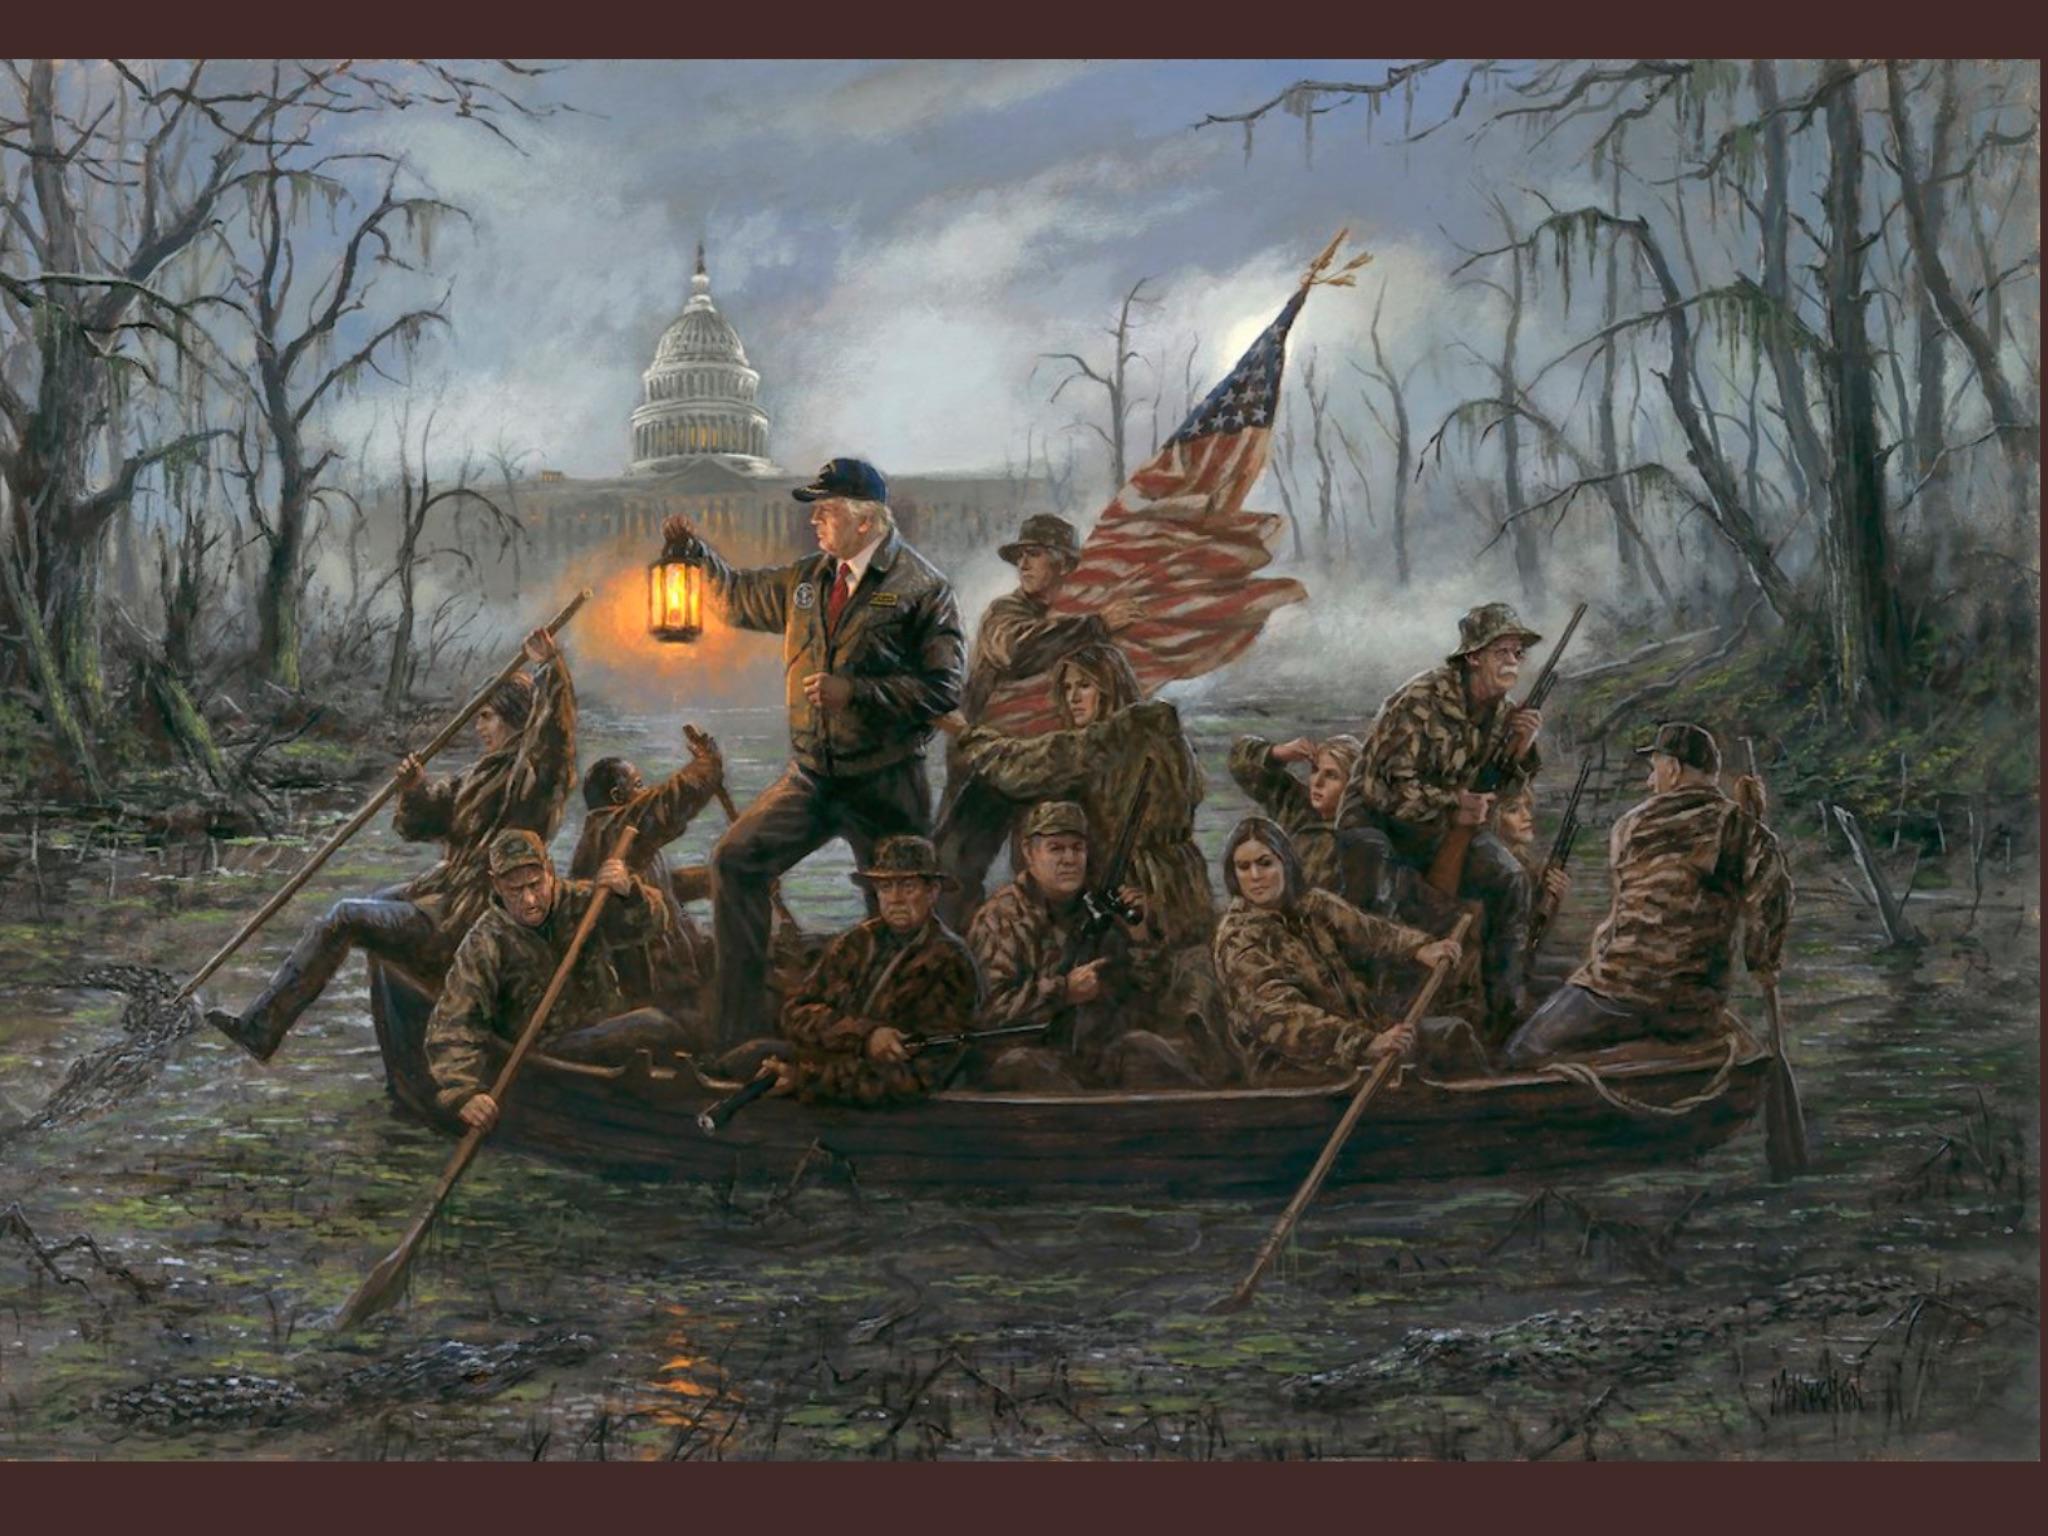 George Washington crossed the Delaware river in a surprise attack on the Hessian forces in NJ.. Trump is crossing the Washington swamp looking for new Cabinet members